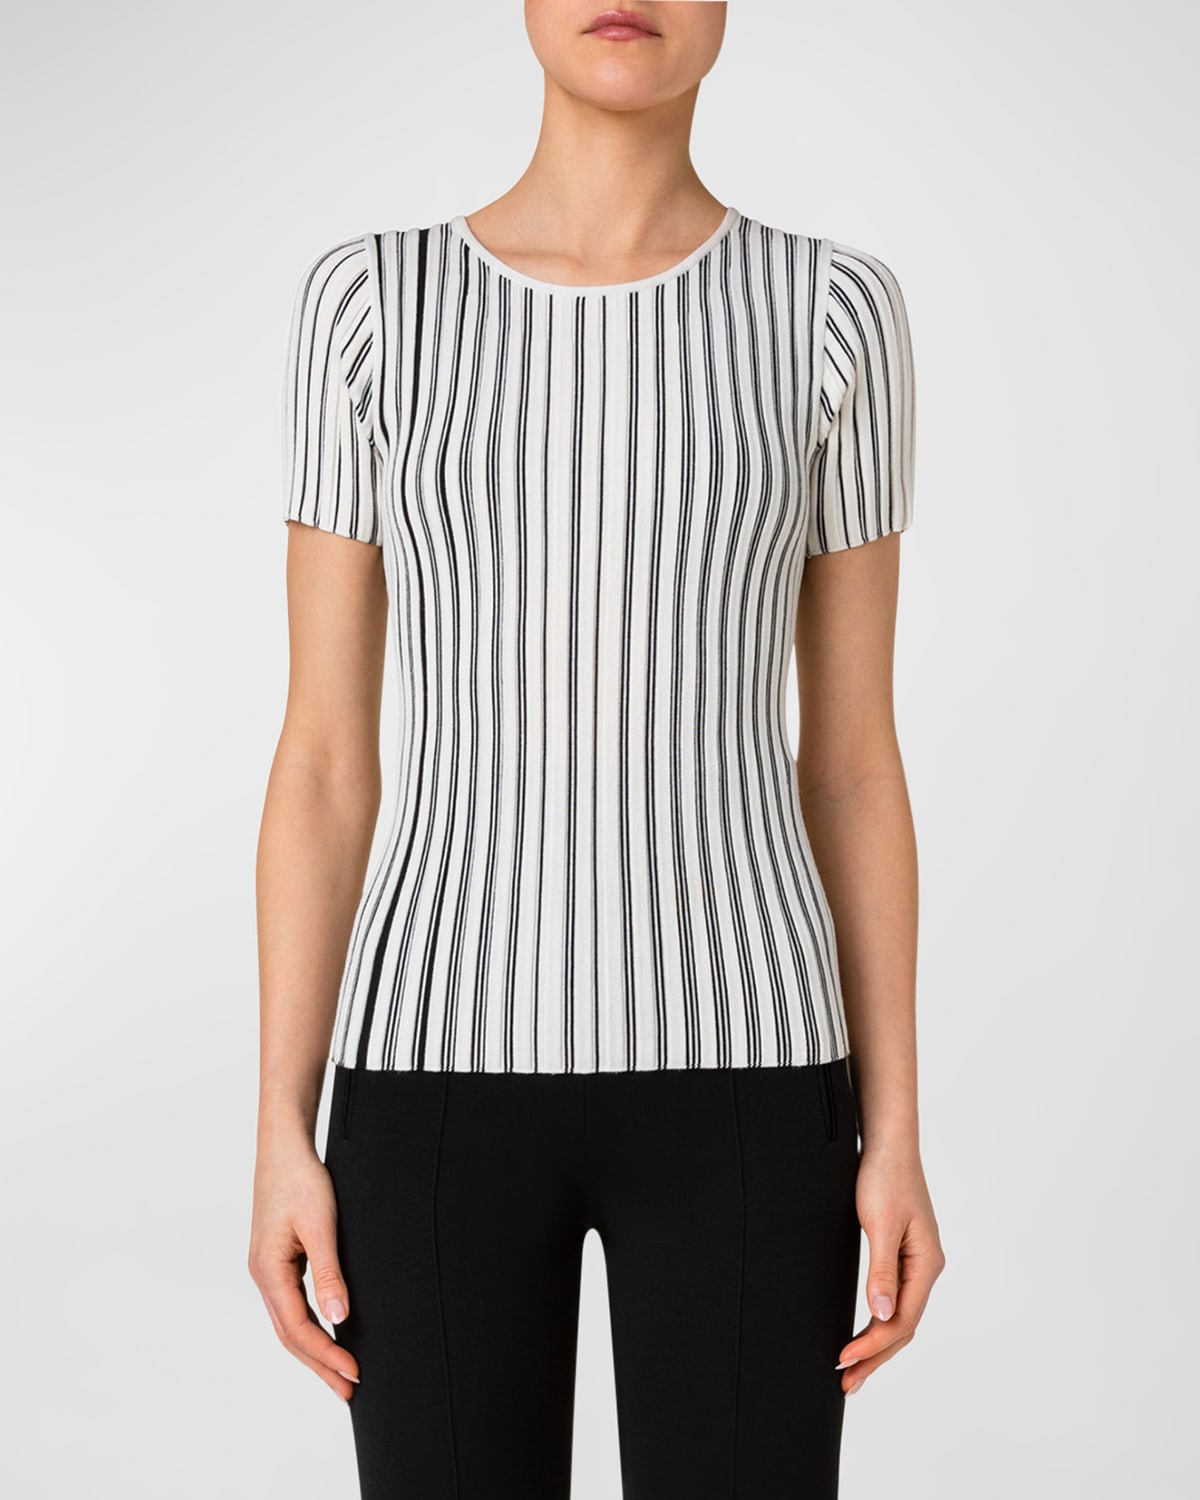 AKRIS PUNTO STRUCTURED STRIPES WOOL KNIT PULLOVER TOP